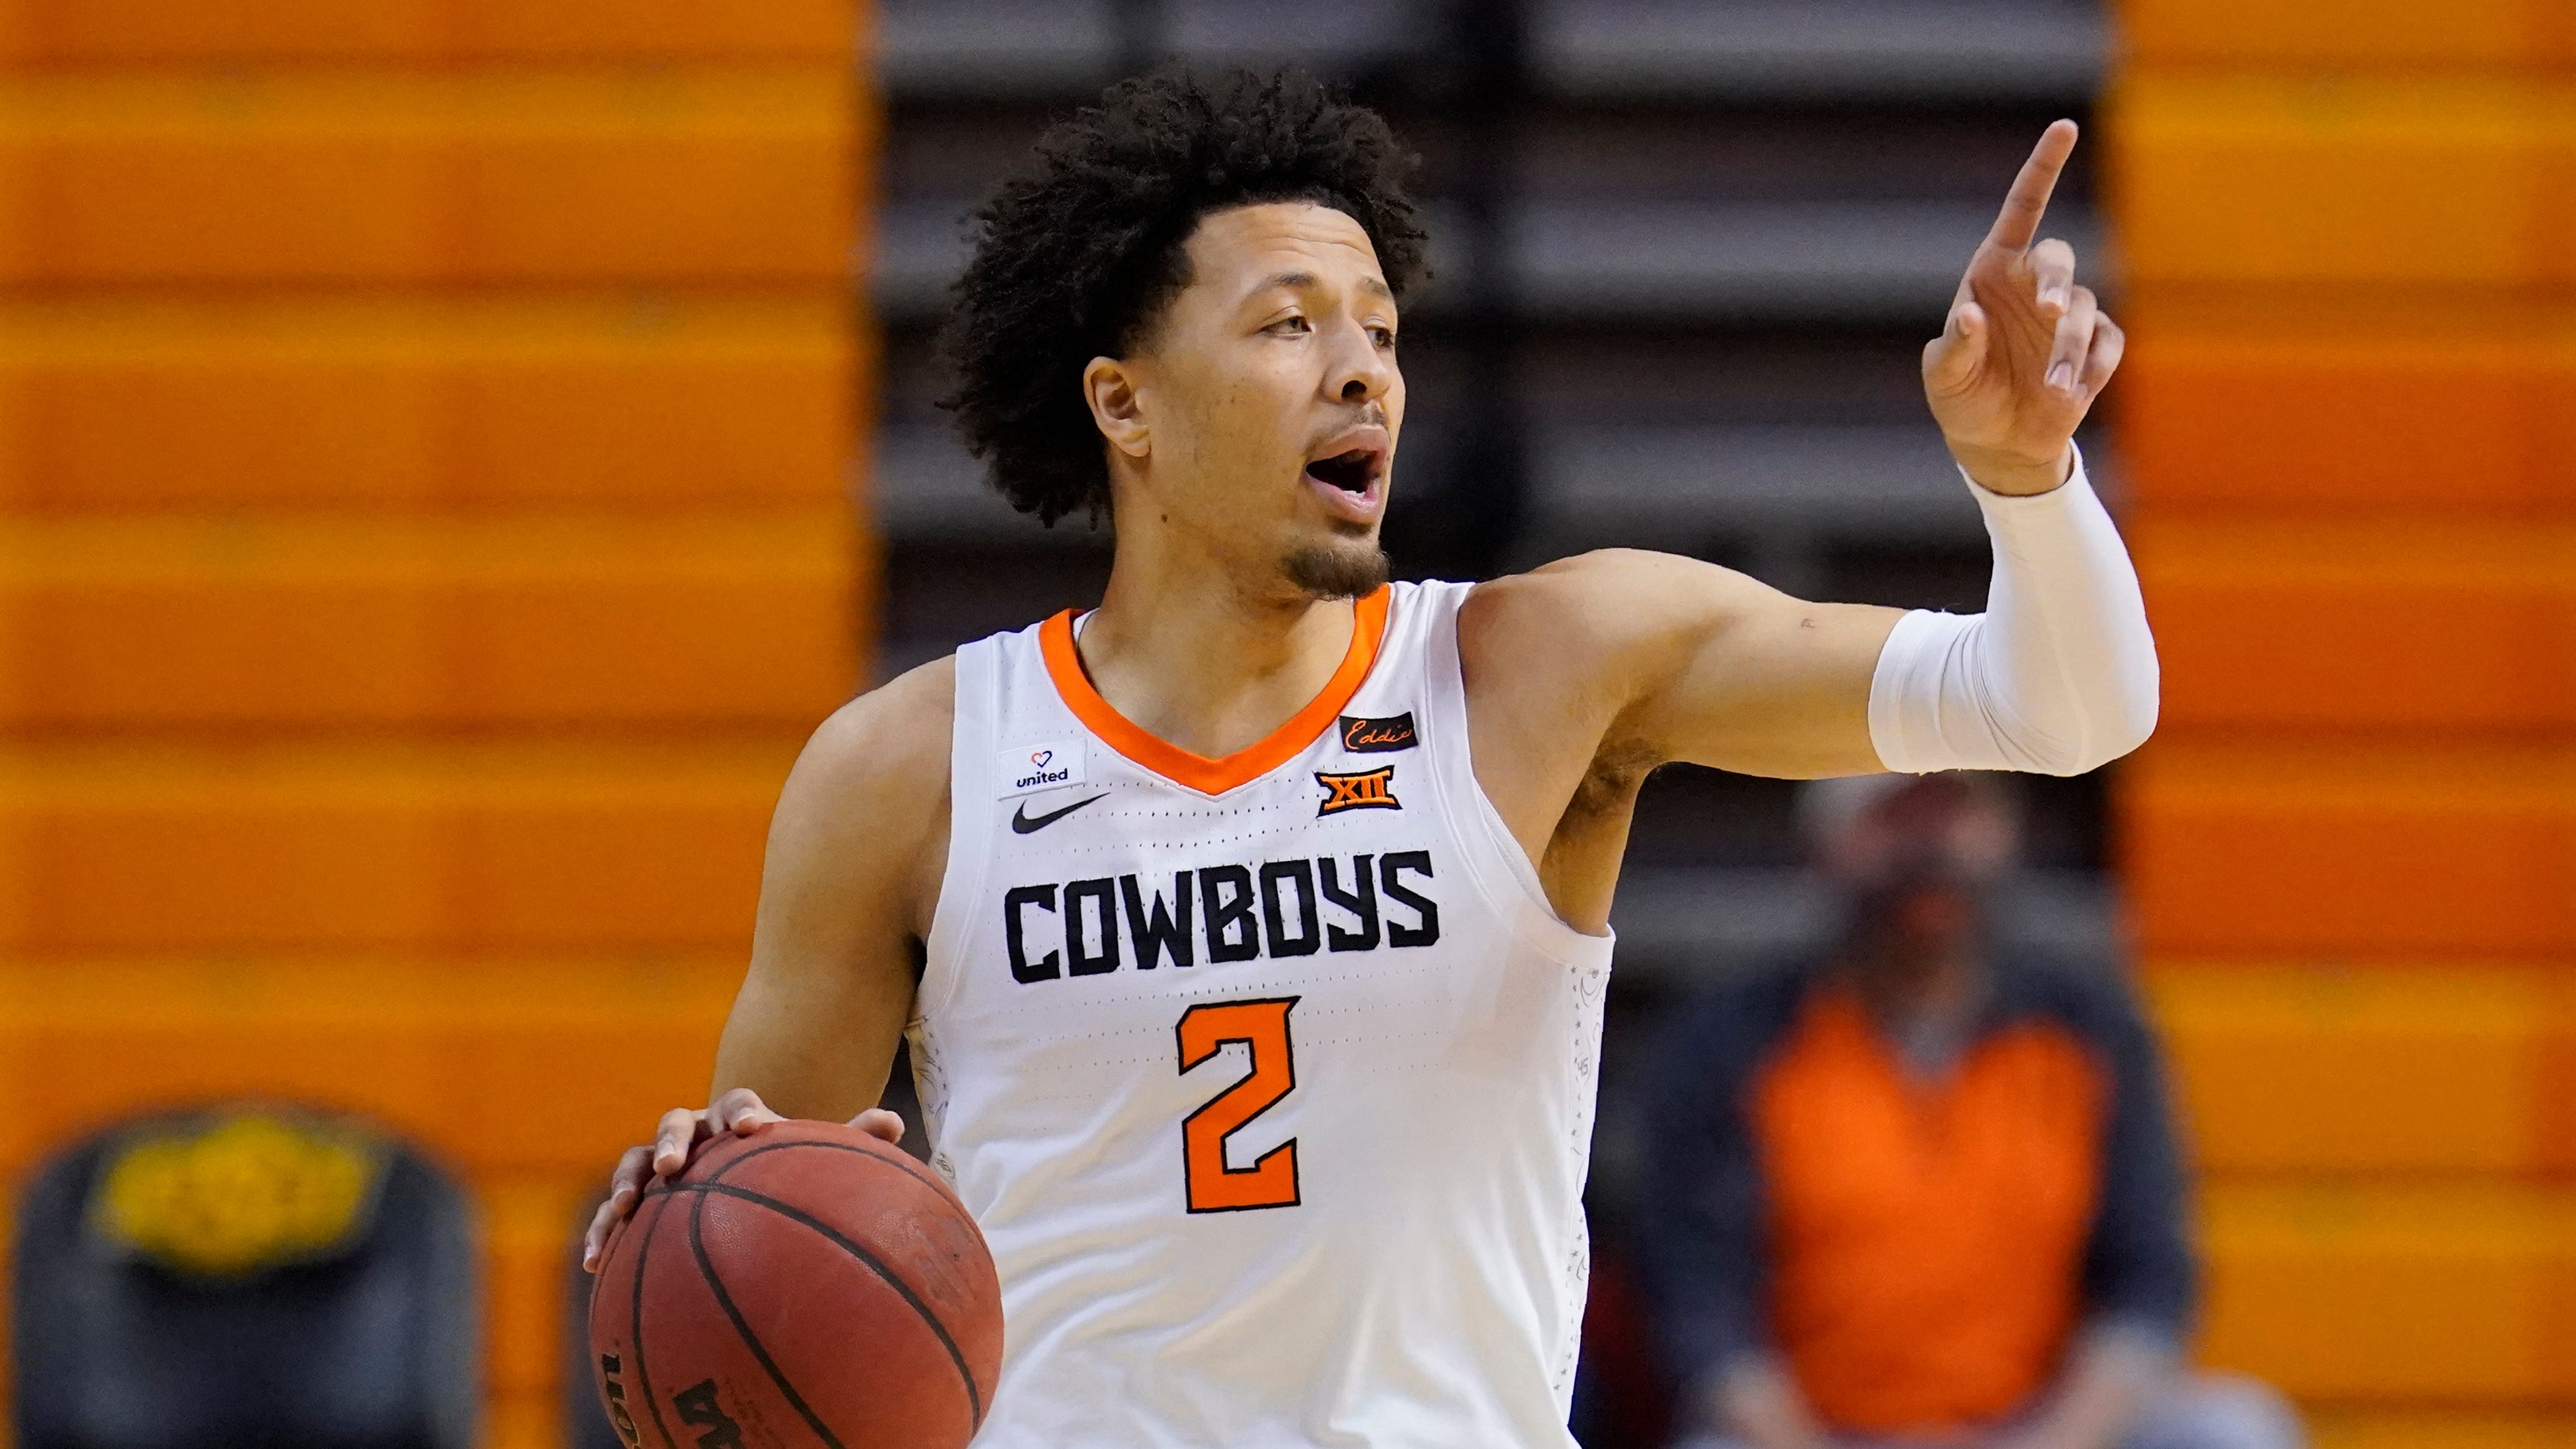 Oklahoma State basketball: March Madness 2021 bracket schedule